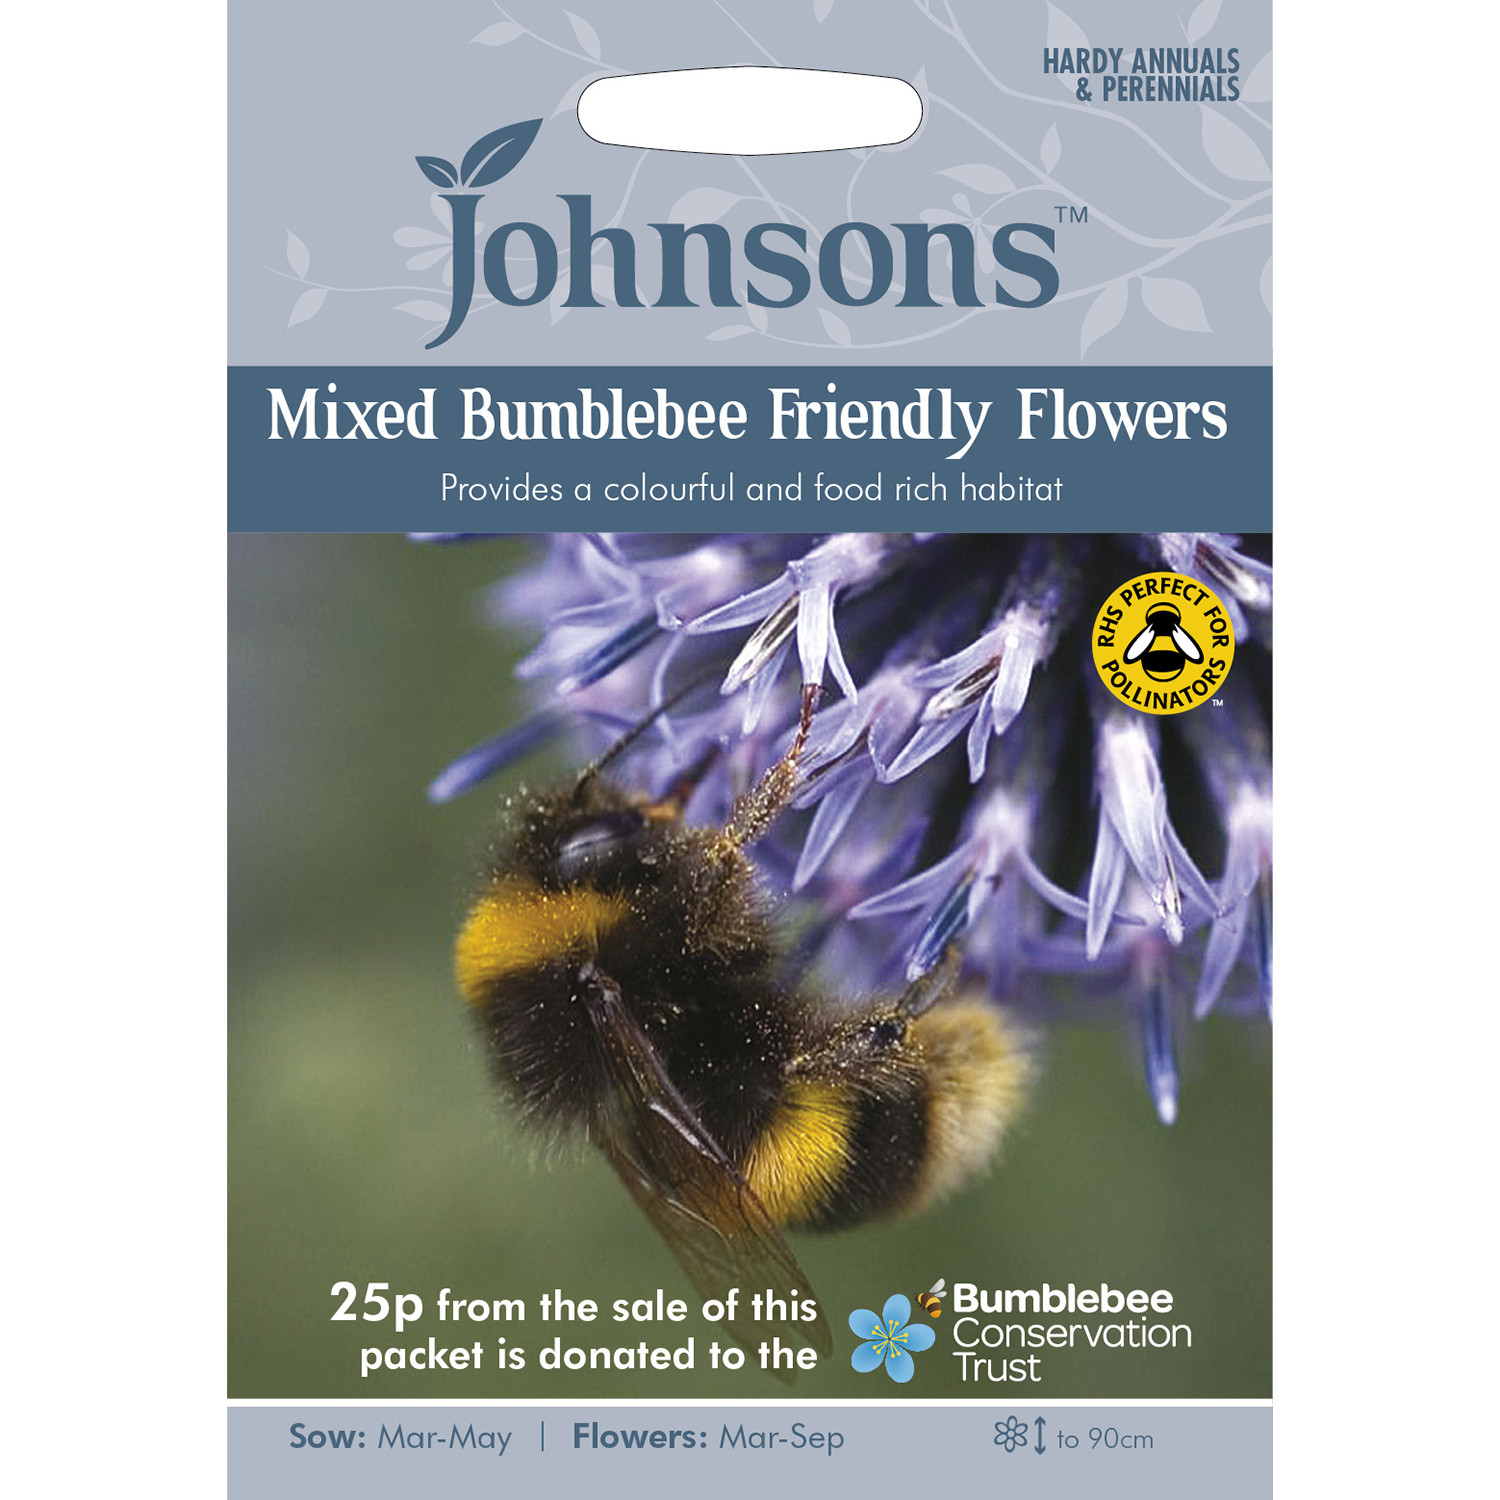 Johnsons Bumblebee Friendly Flower Mixed Flower Seeds Image 2